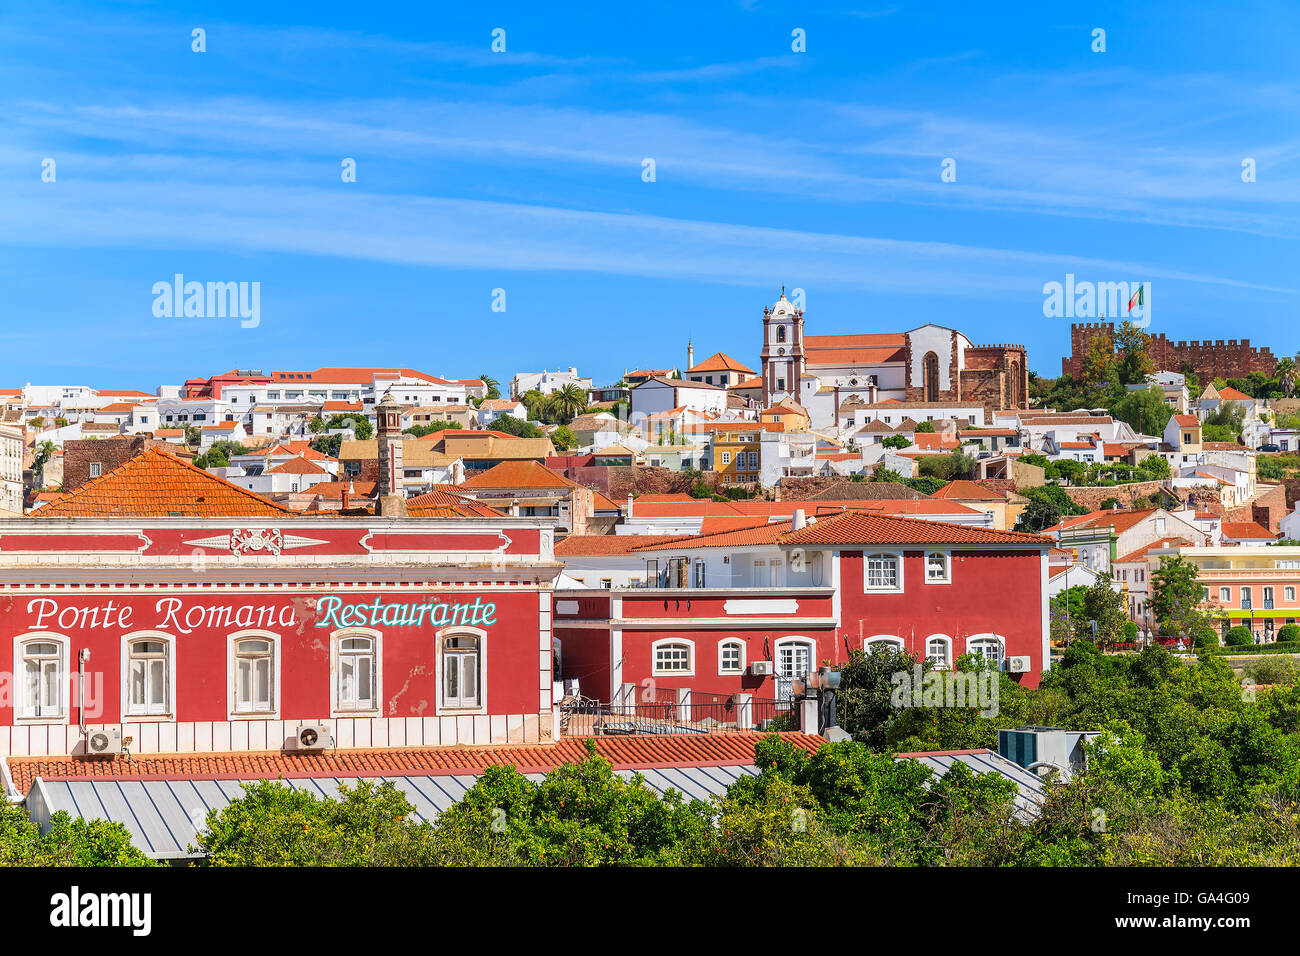 SILVES, PORTUGAL - MAY 17, 2015: restaurant building in Silves town which is famous for best preserved castle in Algarve region and beautiful old cathedral. Stock Photo